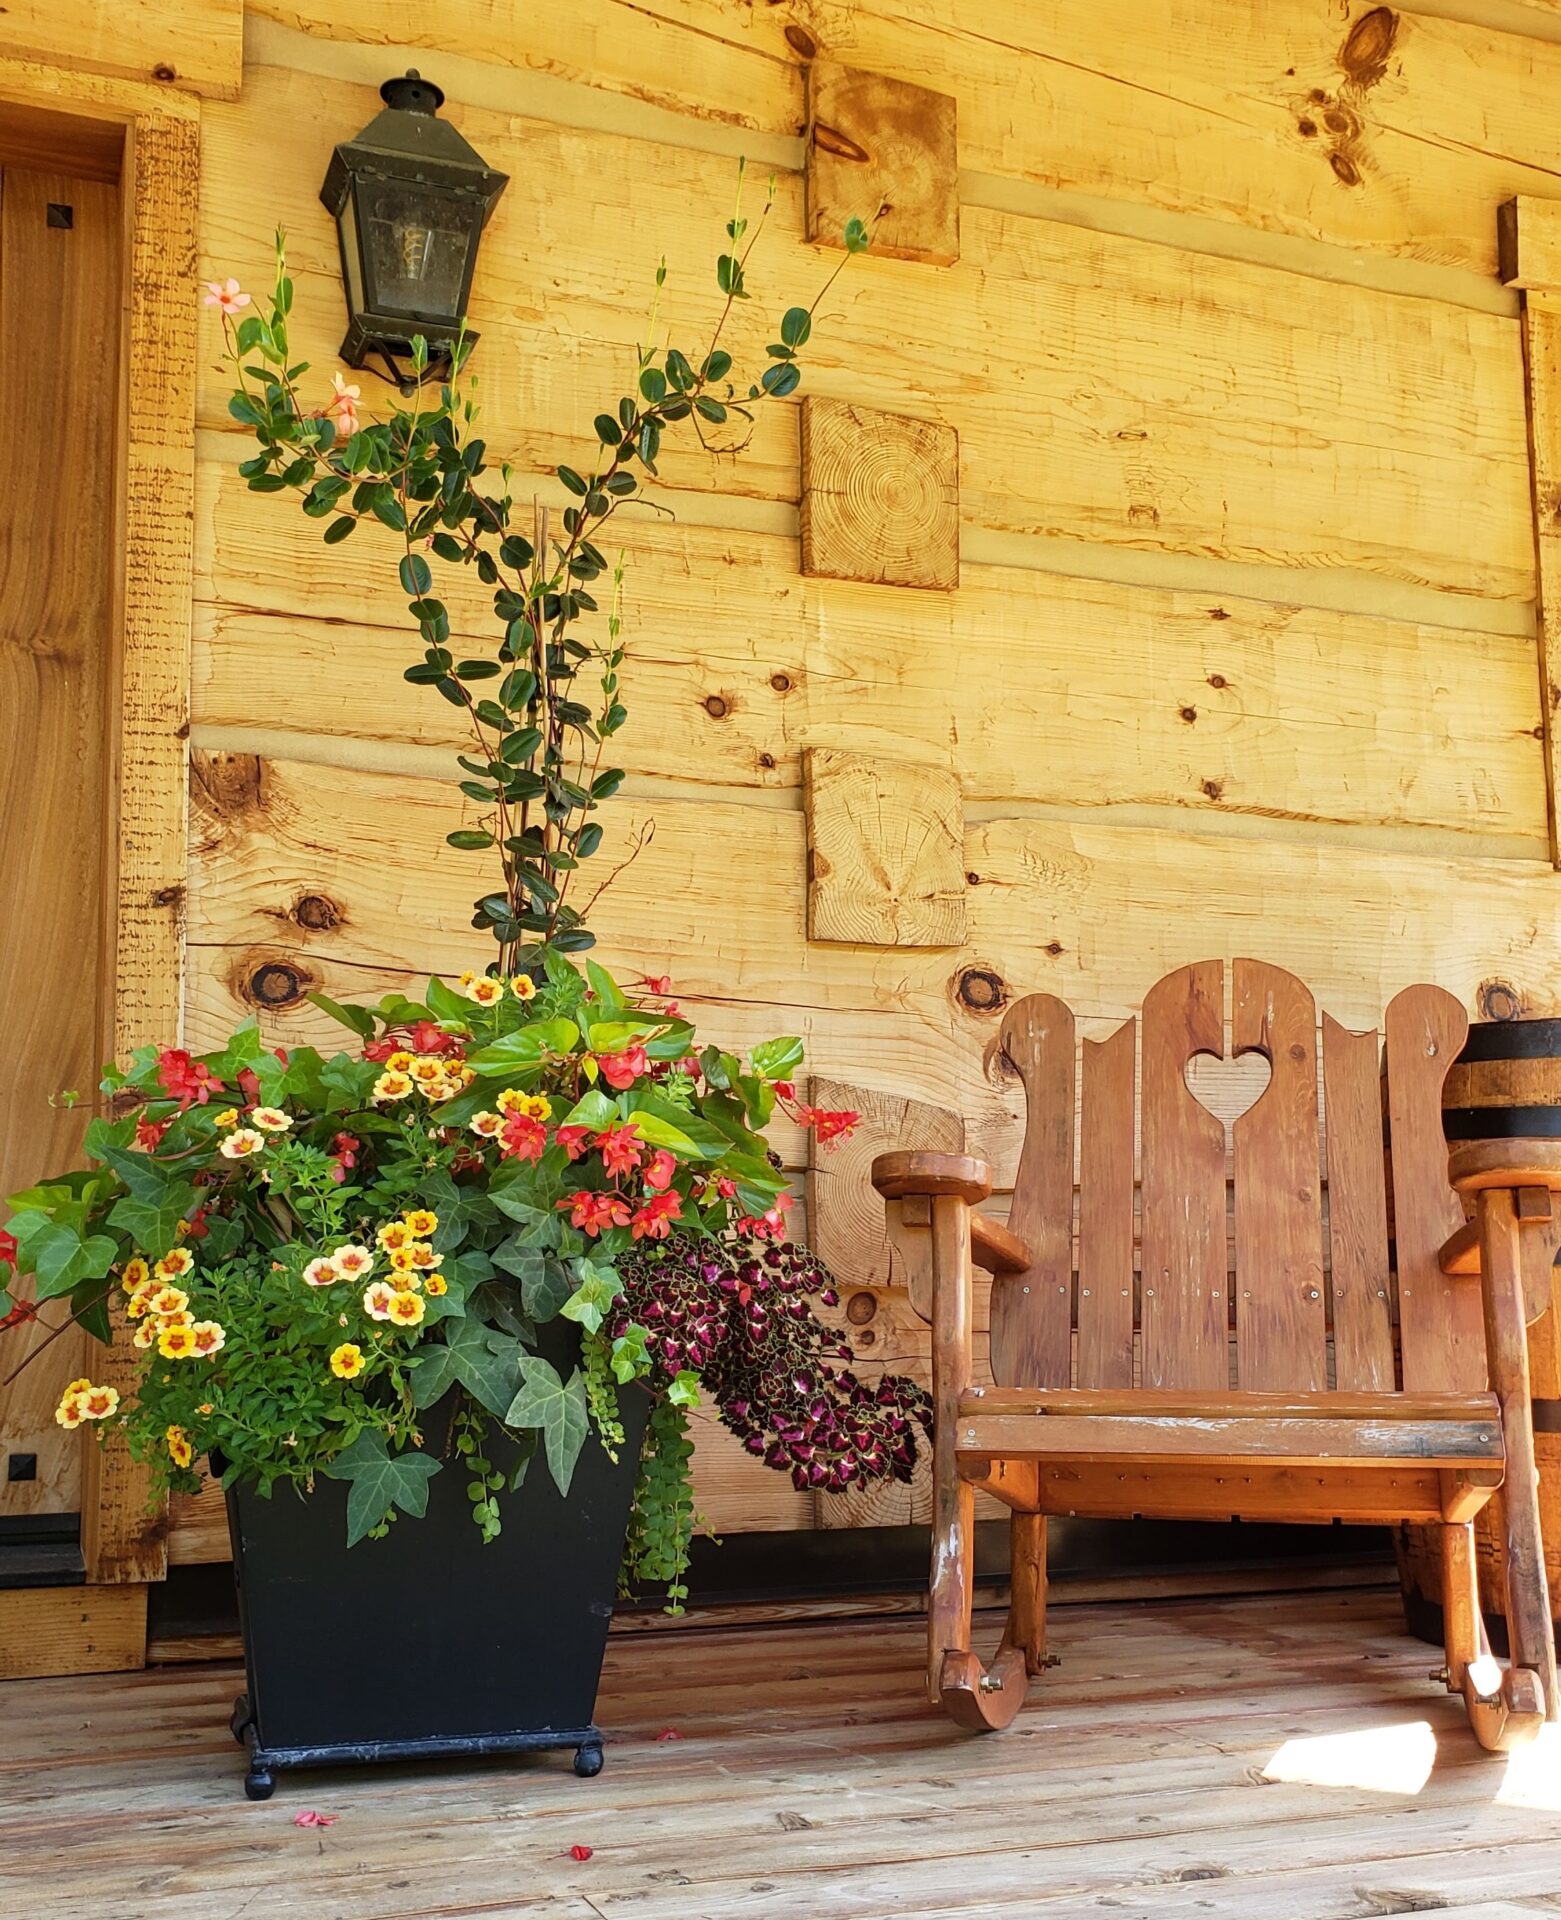 A wooden porch with a rustic bench featuring a heart design, a vibrant potted plant arrangement, and a classic lantern fixture on a sunny day.